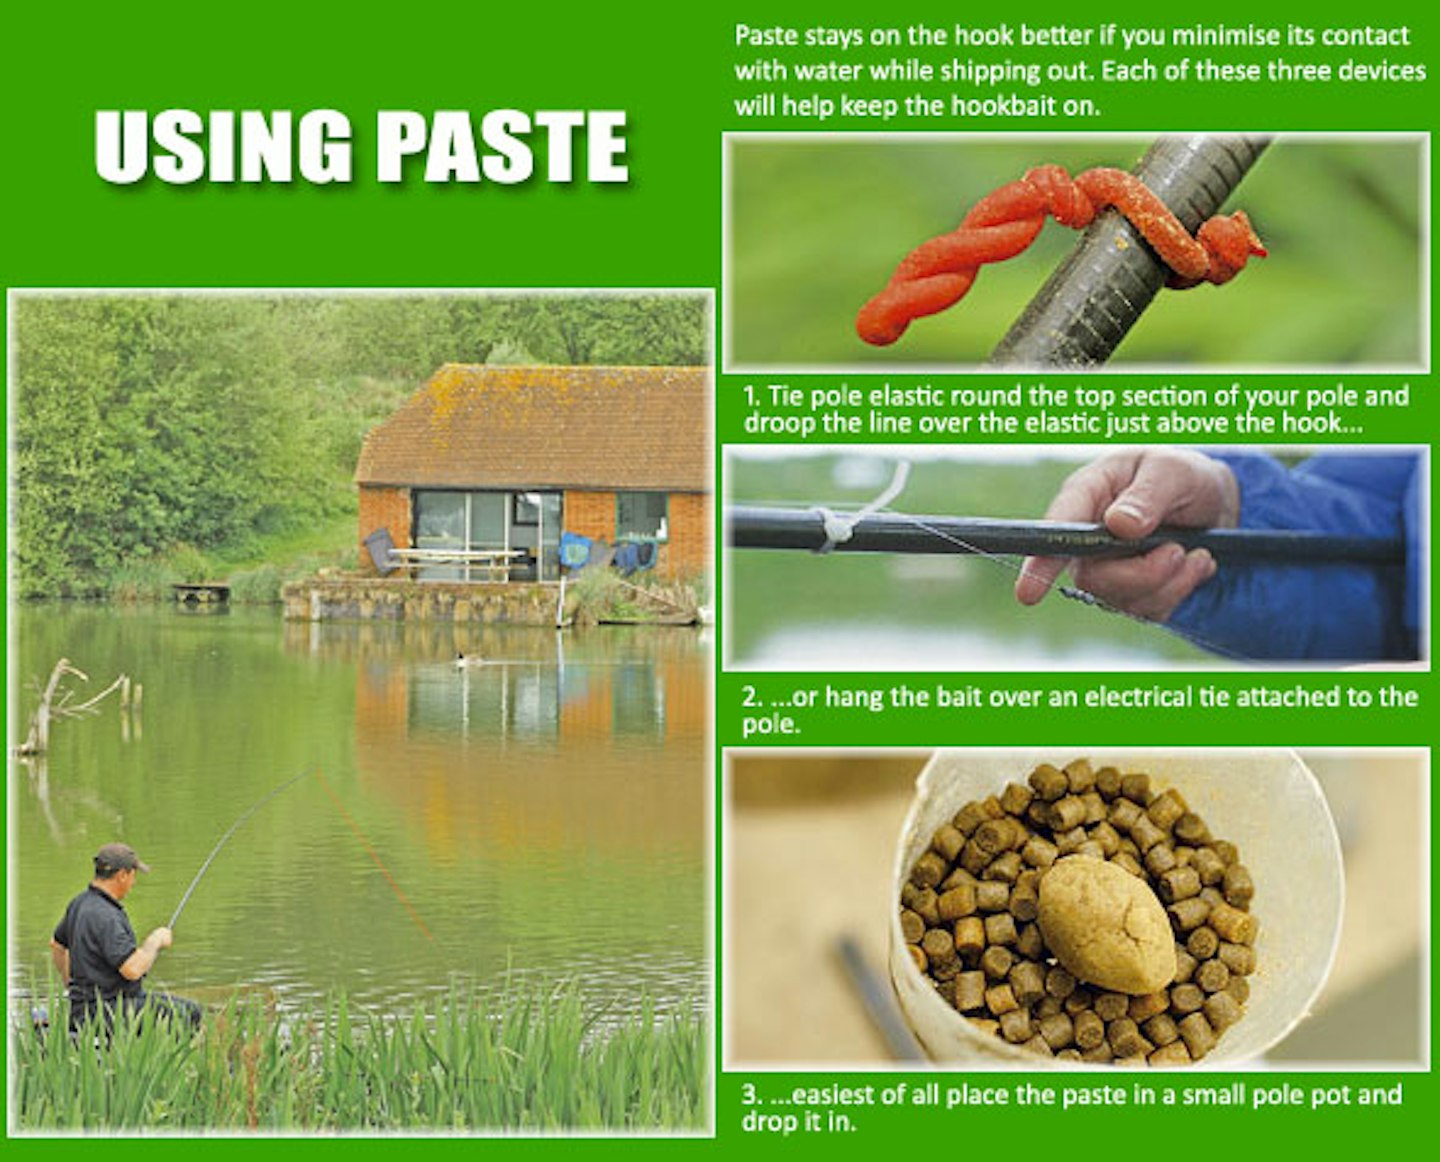 HOW TO USE PASTE